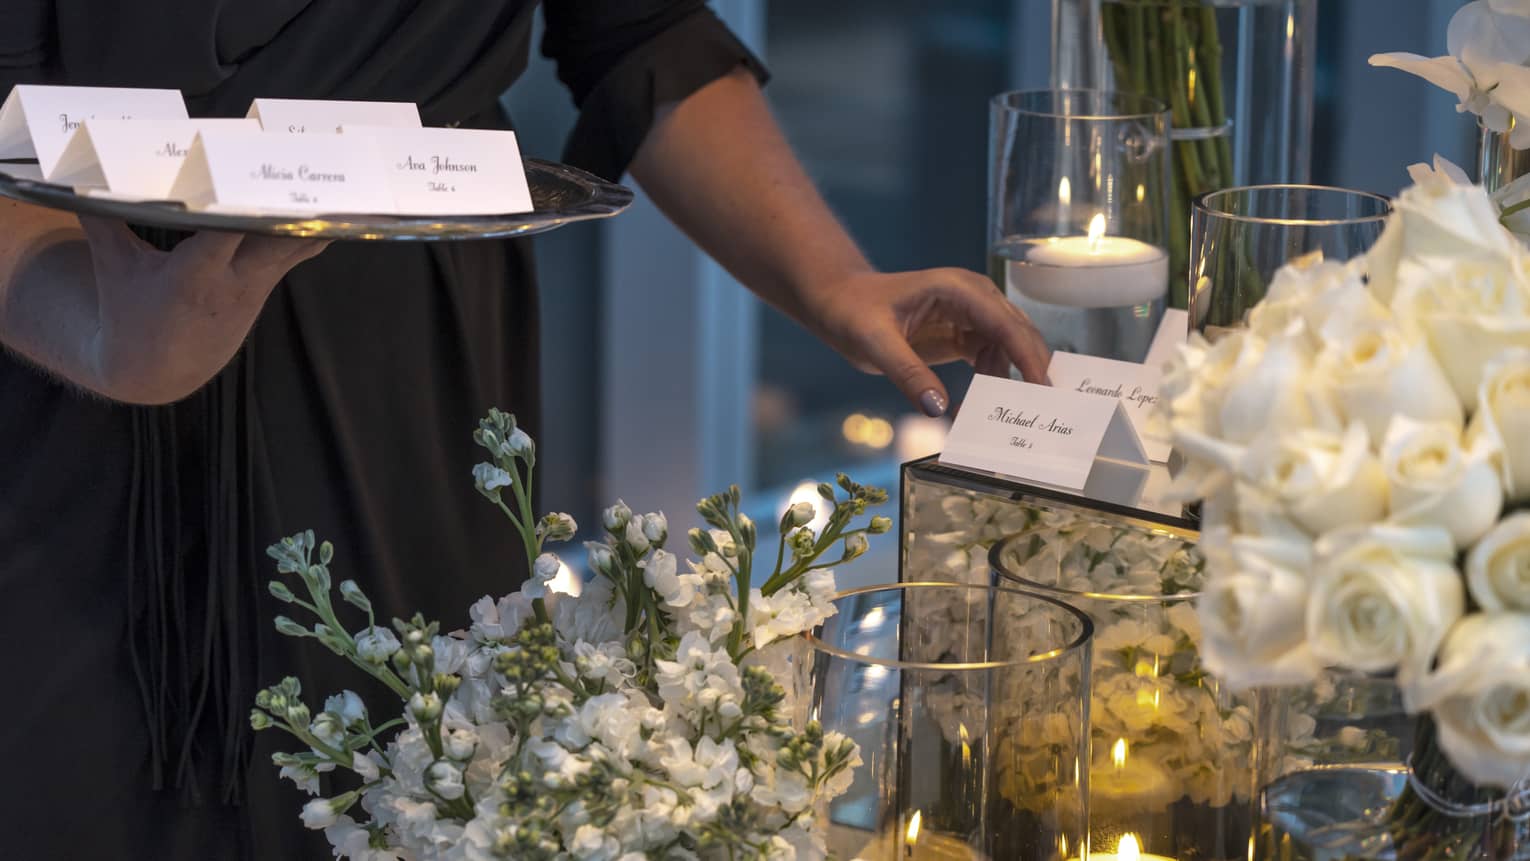 Event staff with tray places name cards on elegant banquet table with white flowers, candles